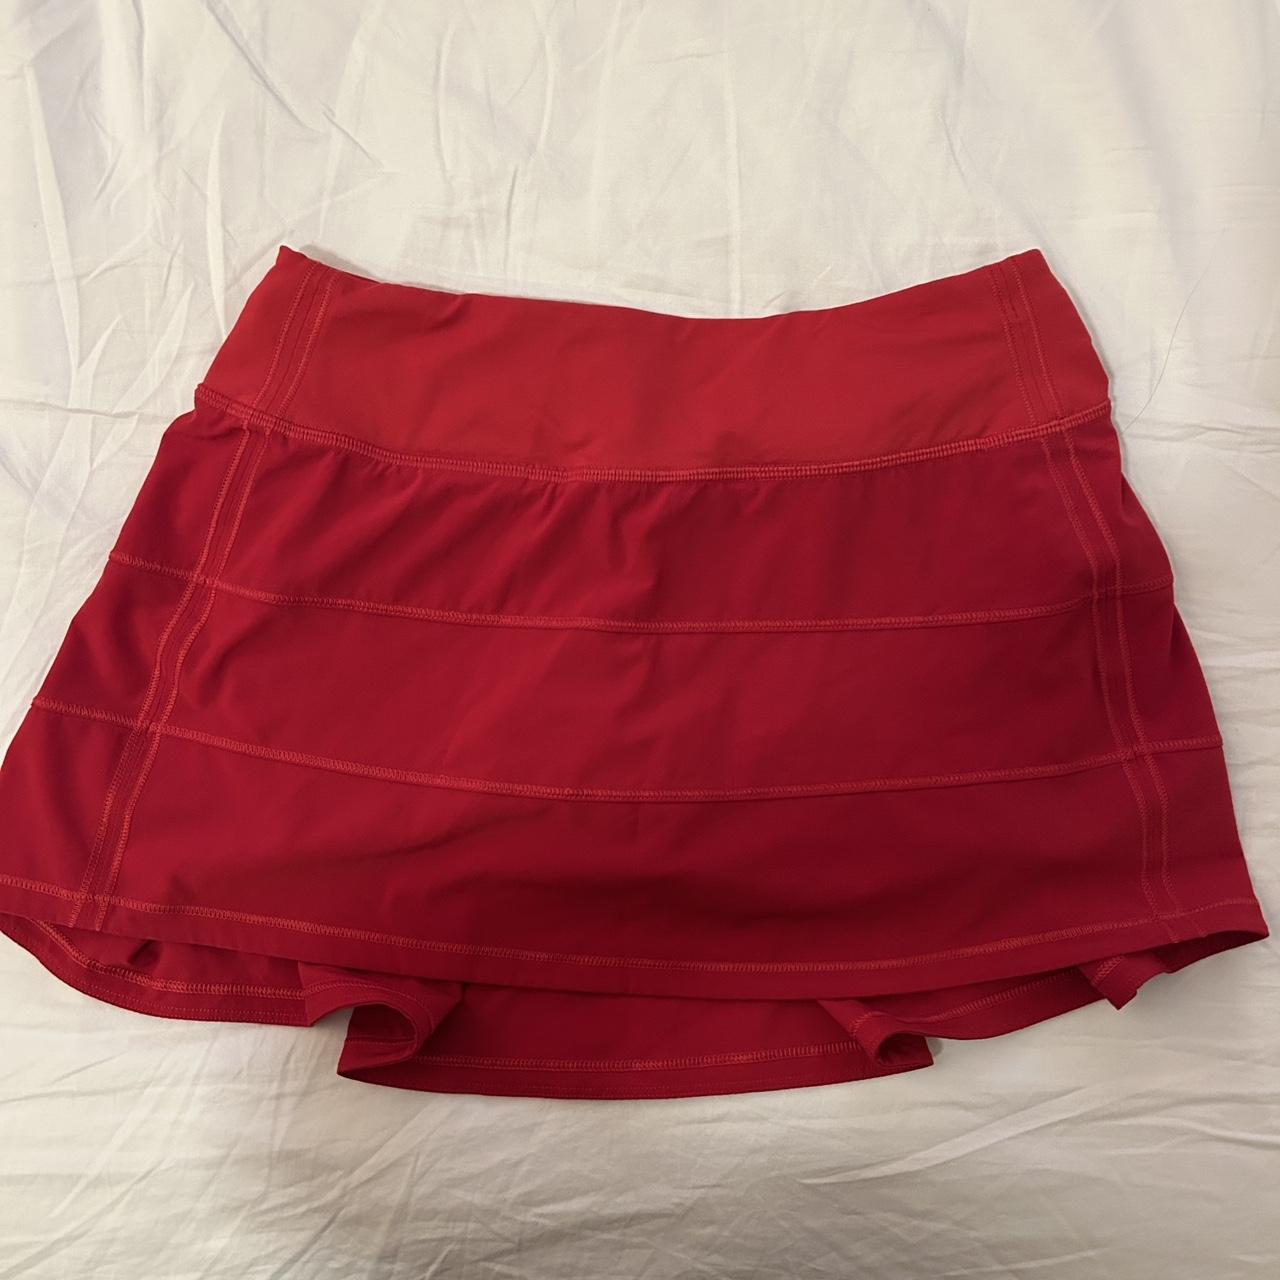 Lululemon Pace Rival Mini Skirt in Red in Size 4.... - Depop